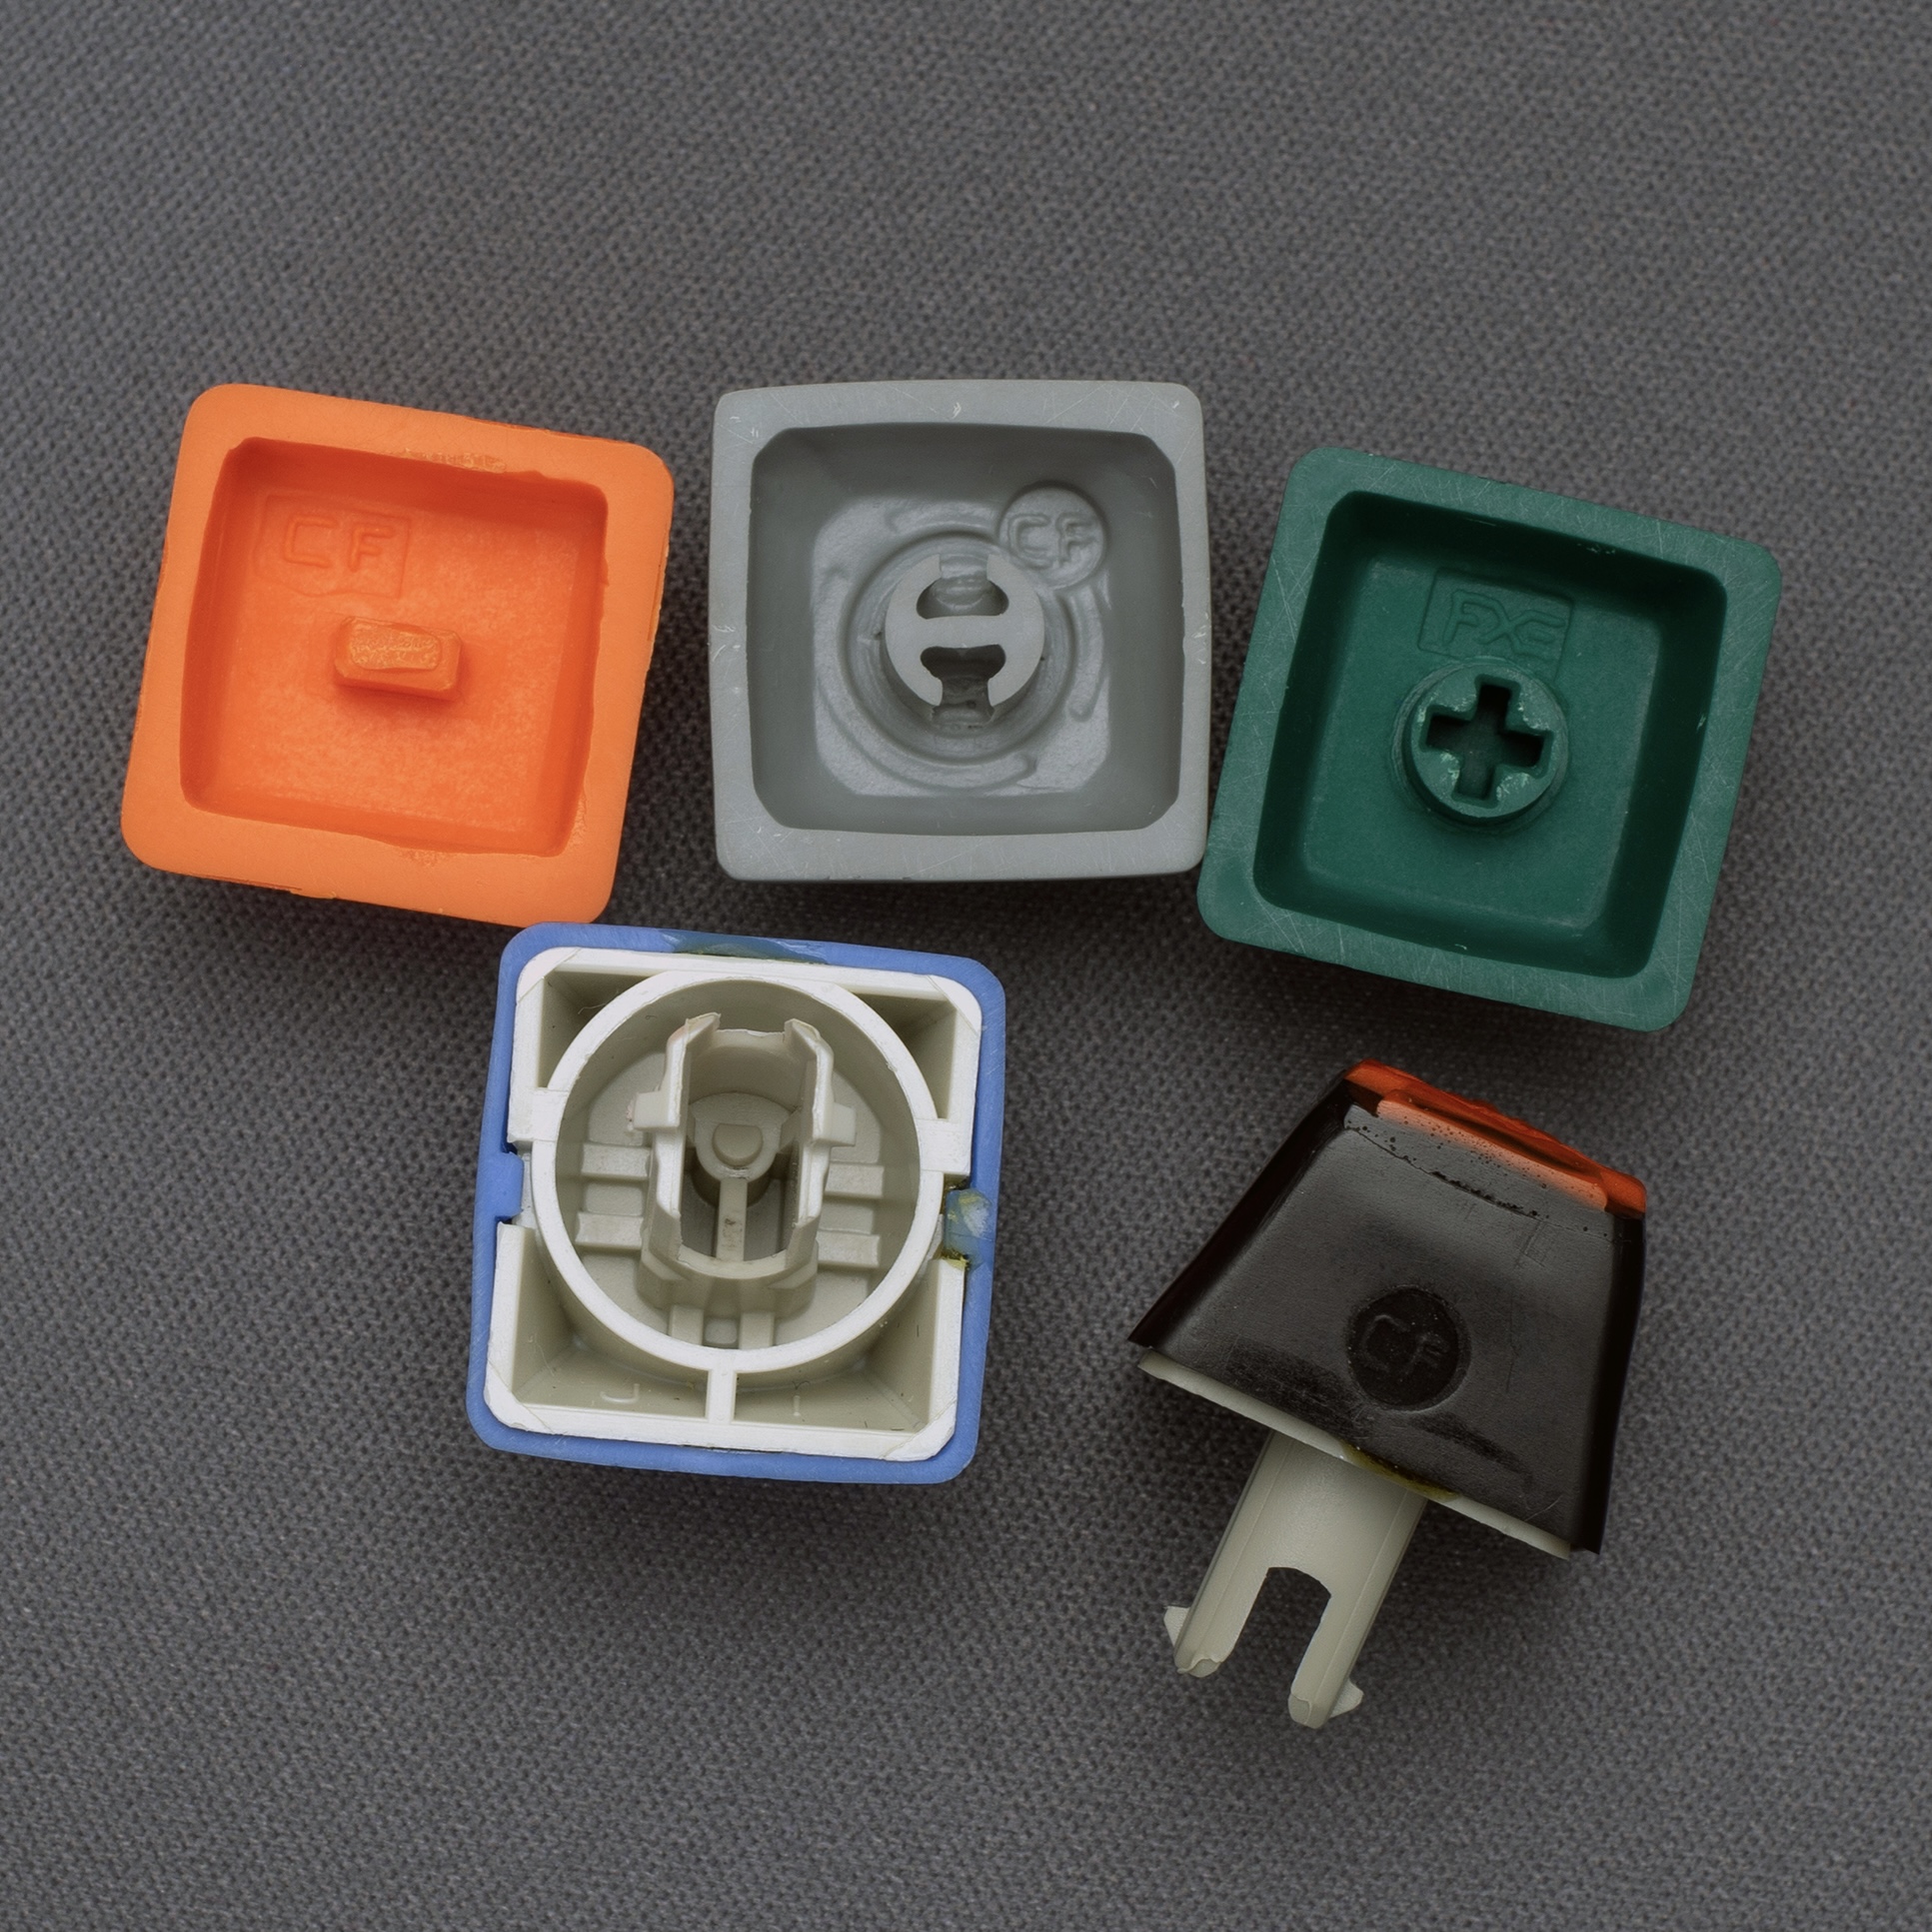 What are Artisan Keycaps?